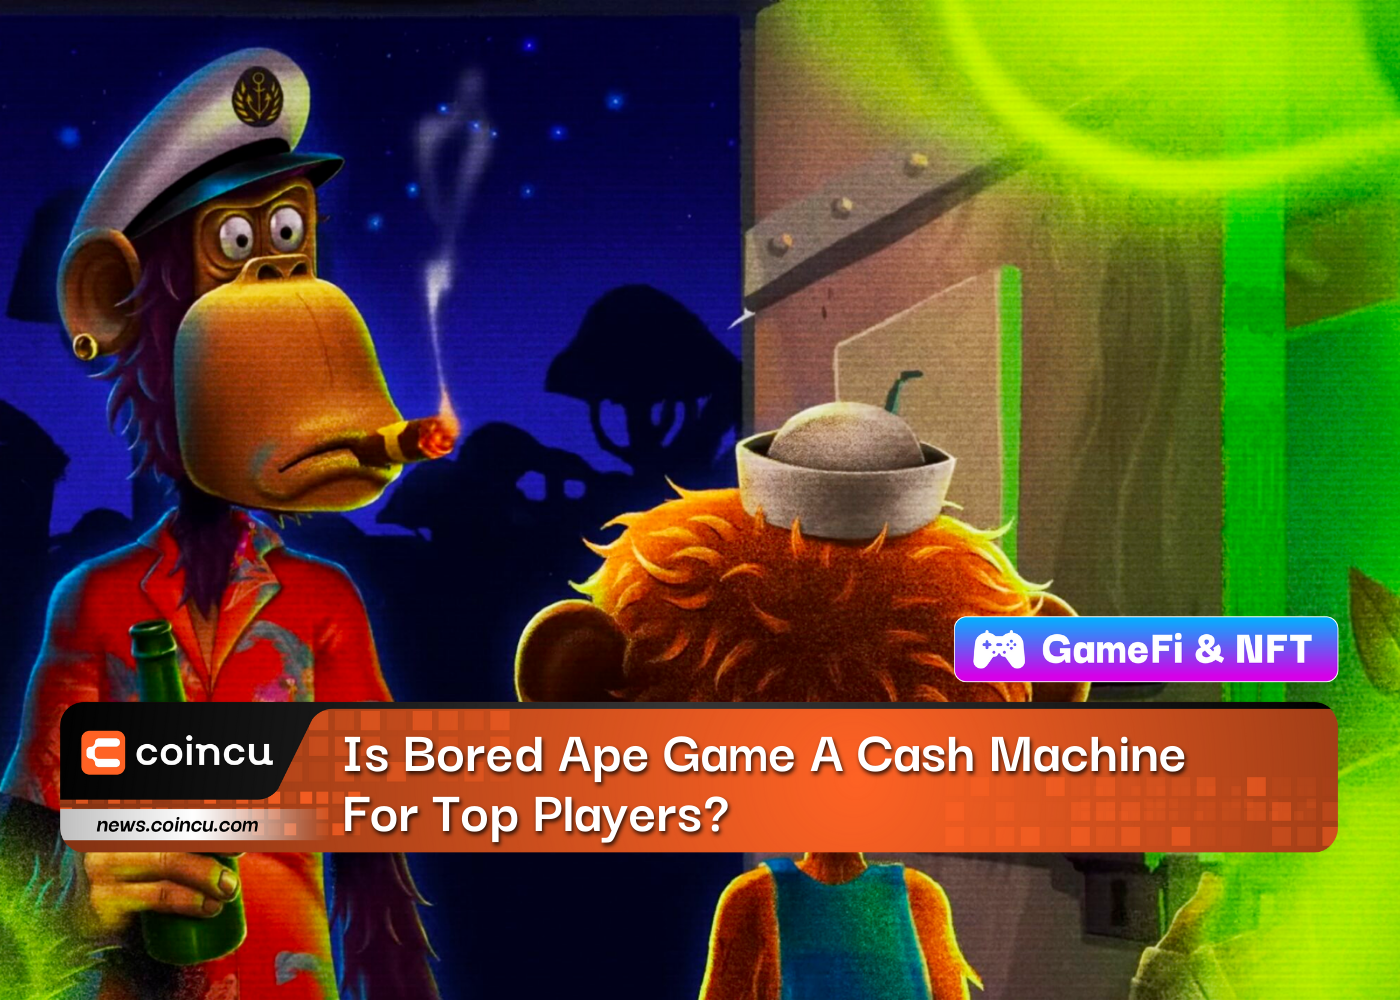 Is Bored Ape Game A Cash Machine For Top Players?